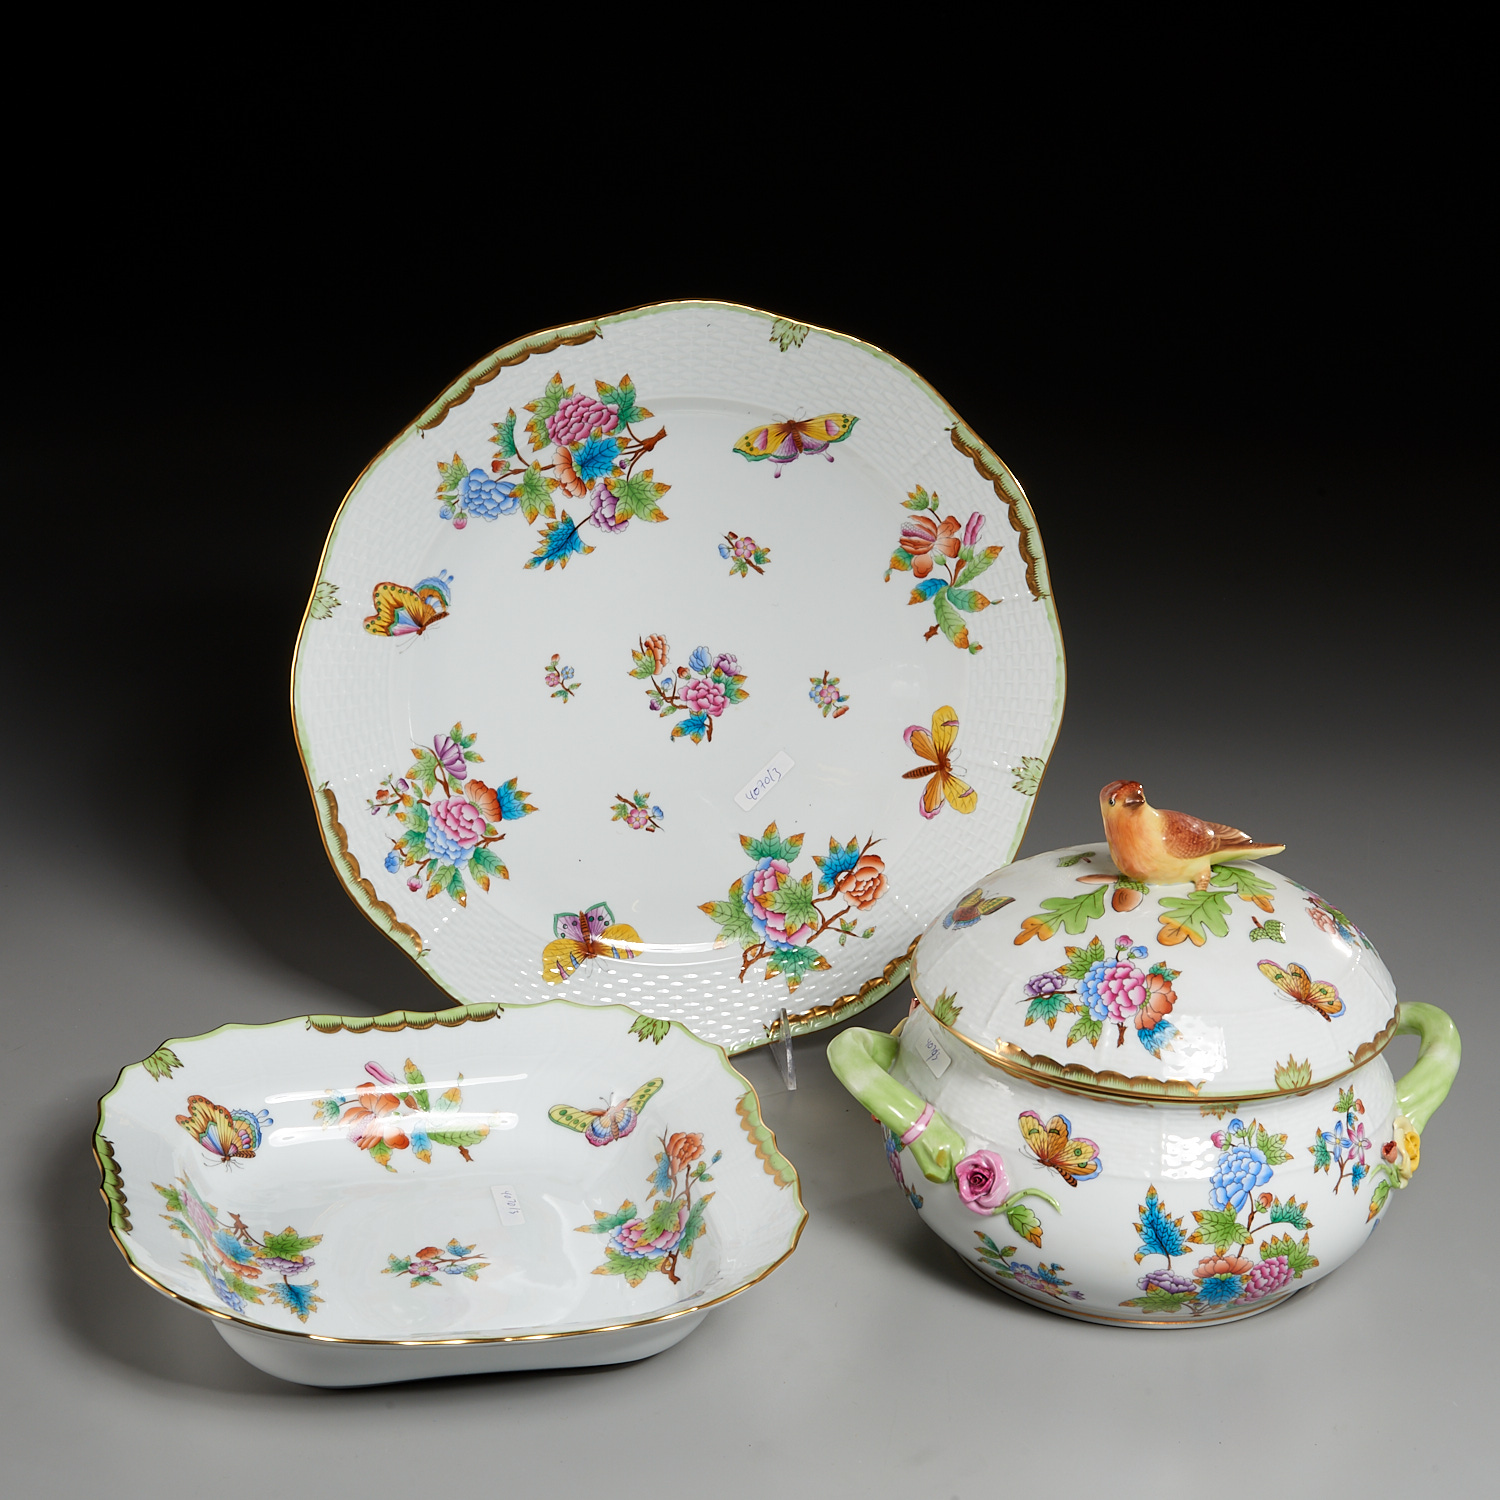 Herend Porcelain Tureen, Tray, and Dish